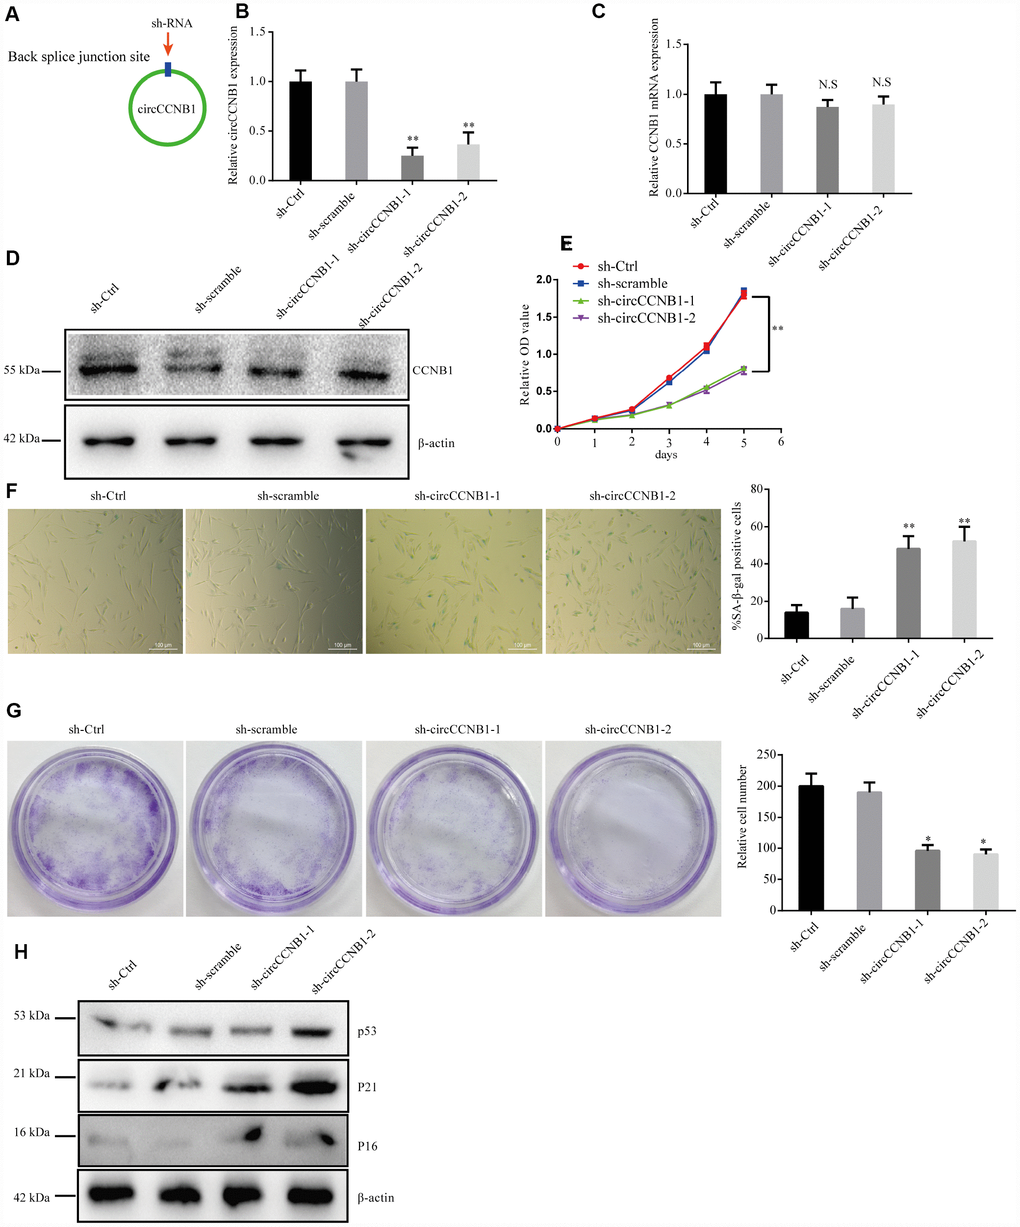 CircCCNB1 suppresses cellular senescence in human diploid fibroblasts. (A) Model showing shRNA specifically targeting the back-splicing sites of CircCCNB1. (B) qRT-PCR measuring the knock down efficiency by sh-CircCCNB1 in 2BS cells after transfection with lentiviruses expressing sh-ctr, sh-scramble, sh-circCCNB1-1, sh-circCCNB1-2, **PC) qRT-PCR detects CCNB1 mRNA level in 2BS cells transfected with lentiviral expressing sh-ctr, sh-scramble, sh-CircCCNB1-1and sh-CircCCNB1-2, N.S, nonsignificant. (D) Immunoblot analysis of CCNB1 protein level in 2BS cells transduced with lentiviruses expressing sh-ctr, sh-scramble, sh-CircCCNB1-1and sh-CircCCNB1-2. (E) CCK-8 measurement of the proliferative ability of 2BS cells after transfection with lentiviruses expressing sh-ctr, sh-scramble, sh-CircCCNB1-1, sh-CircCCNB1-2, **PF) SA-β gal staining of 2BS cells transfected with lentiviruses expressing sh-ctr, sh-scramble, sh-CircCCNB1-1and sh-CircCCNB1-2, bar, 100 μm, **PG) Clonogenicity assay of 2BS cells transfected with lentiviruses expressing sh-ctr, sh-scramble, sh-CircCCNB1-1and sh-CircCCNB1-2, *PH) Immunoblots analysis of P53, P21 and p16 levles in 2BS cells transfected with lentiviruses expressing sh-ctr, sh-scramble, sh-CircCCNB1-1and sh-CircCCNB1-2.